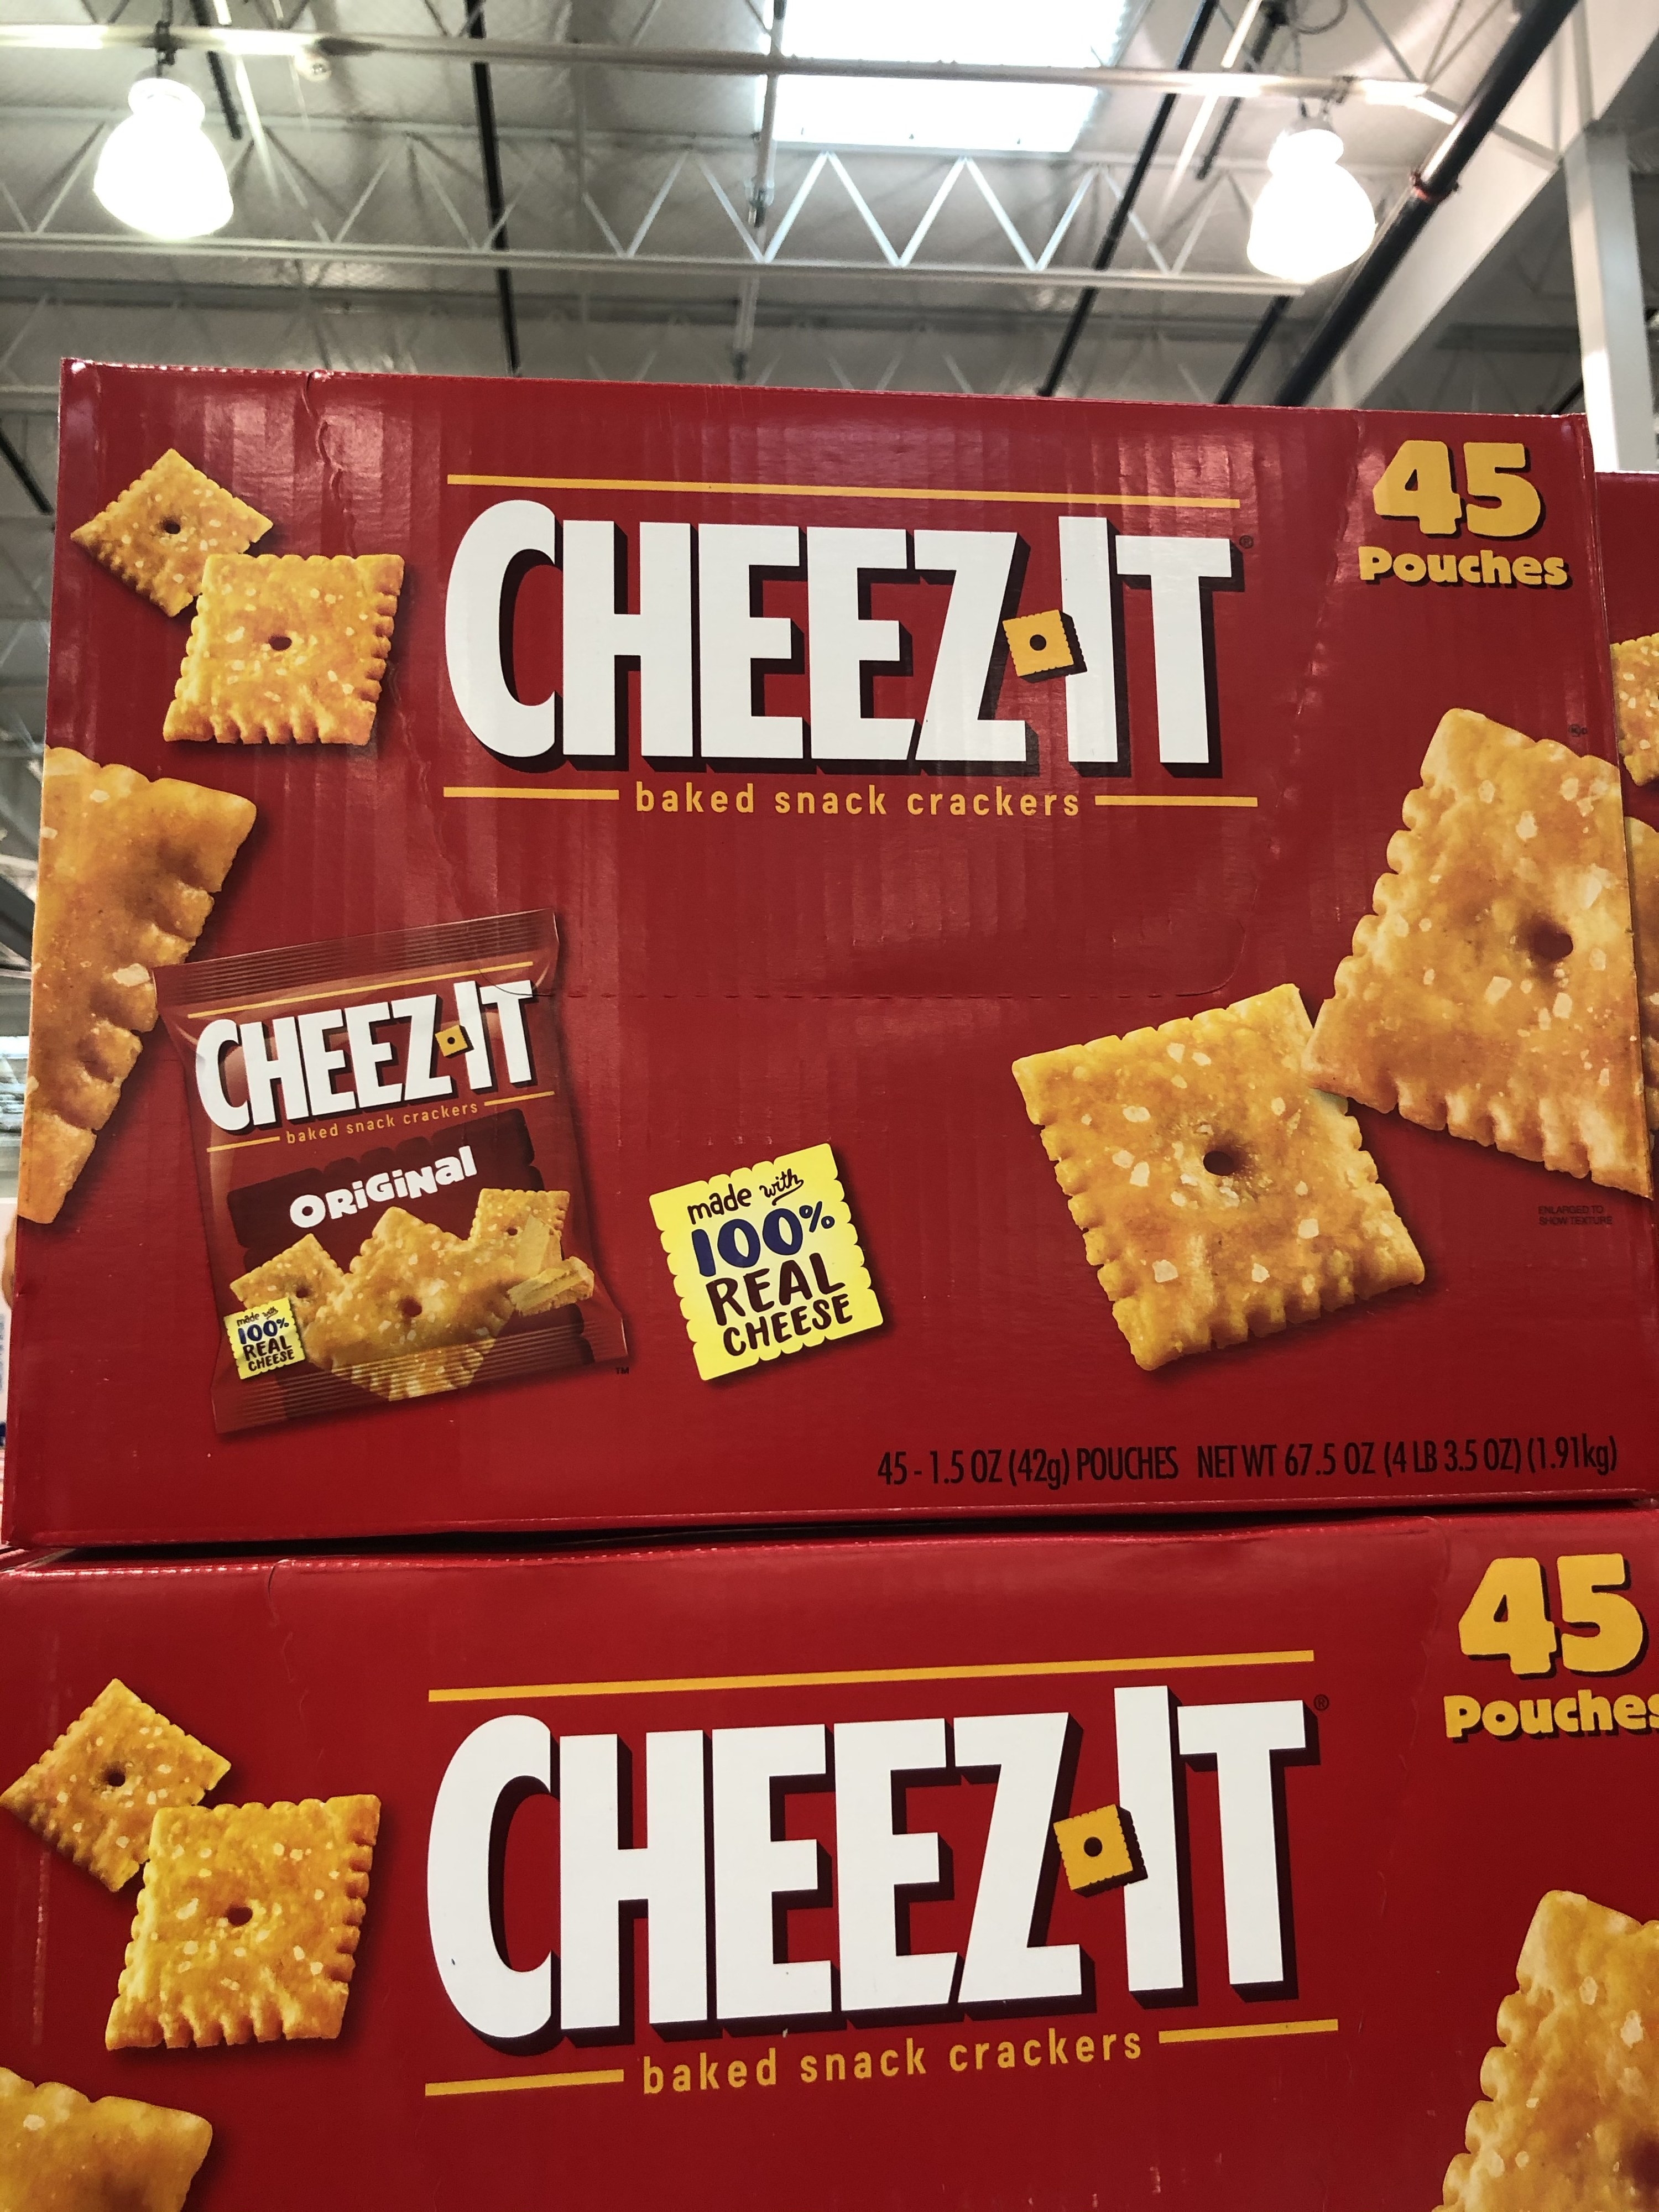 A box of Cheez Its